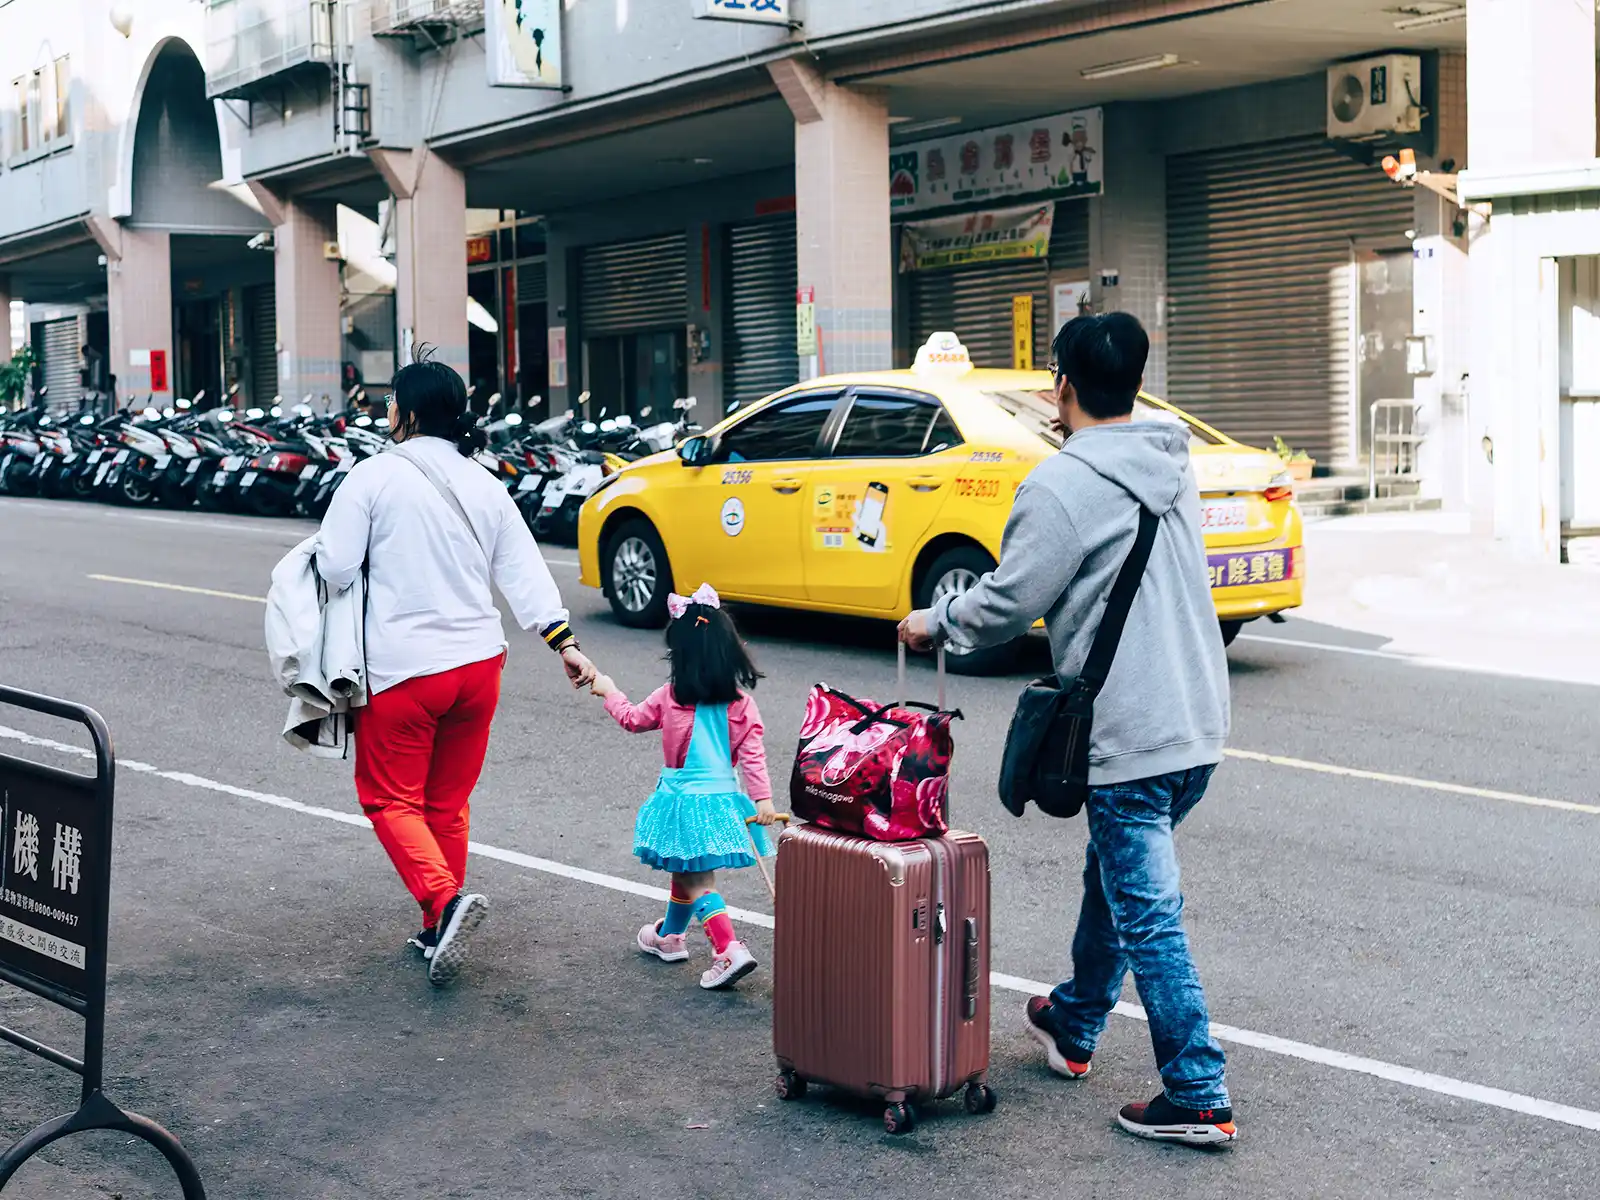 A family with luggage walks by a taxi cab.